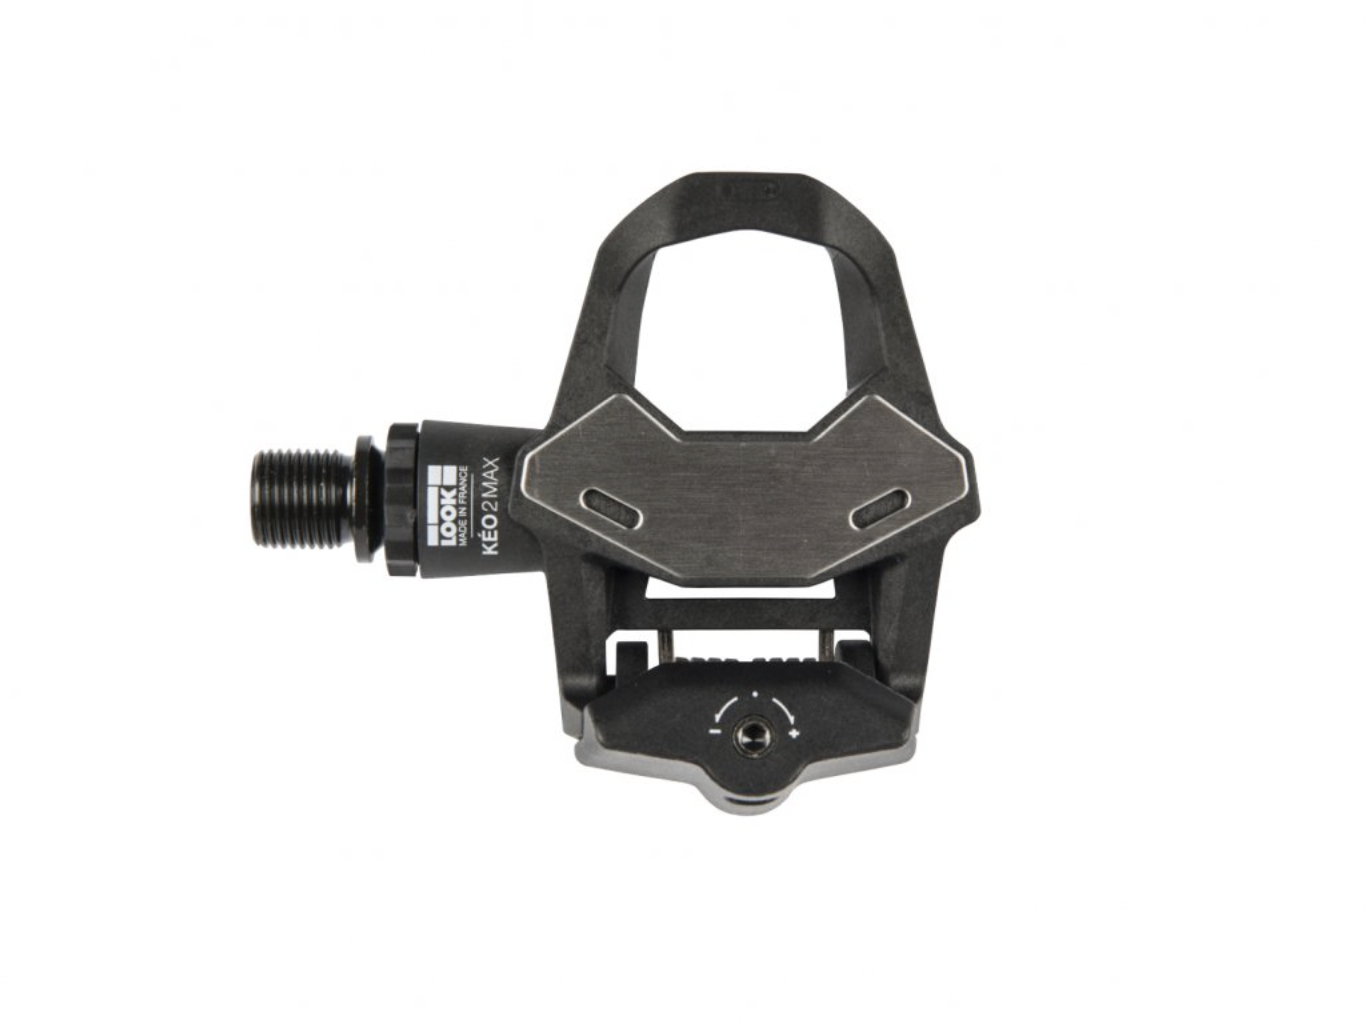 Look Kéo 2 Max Clipless Road Pedals (Refurbished)